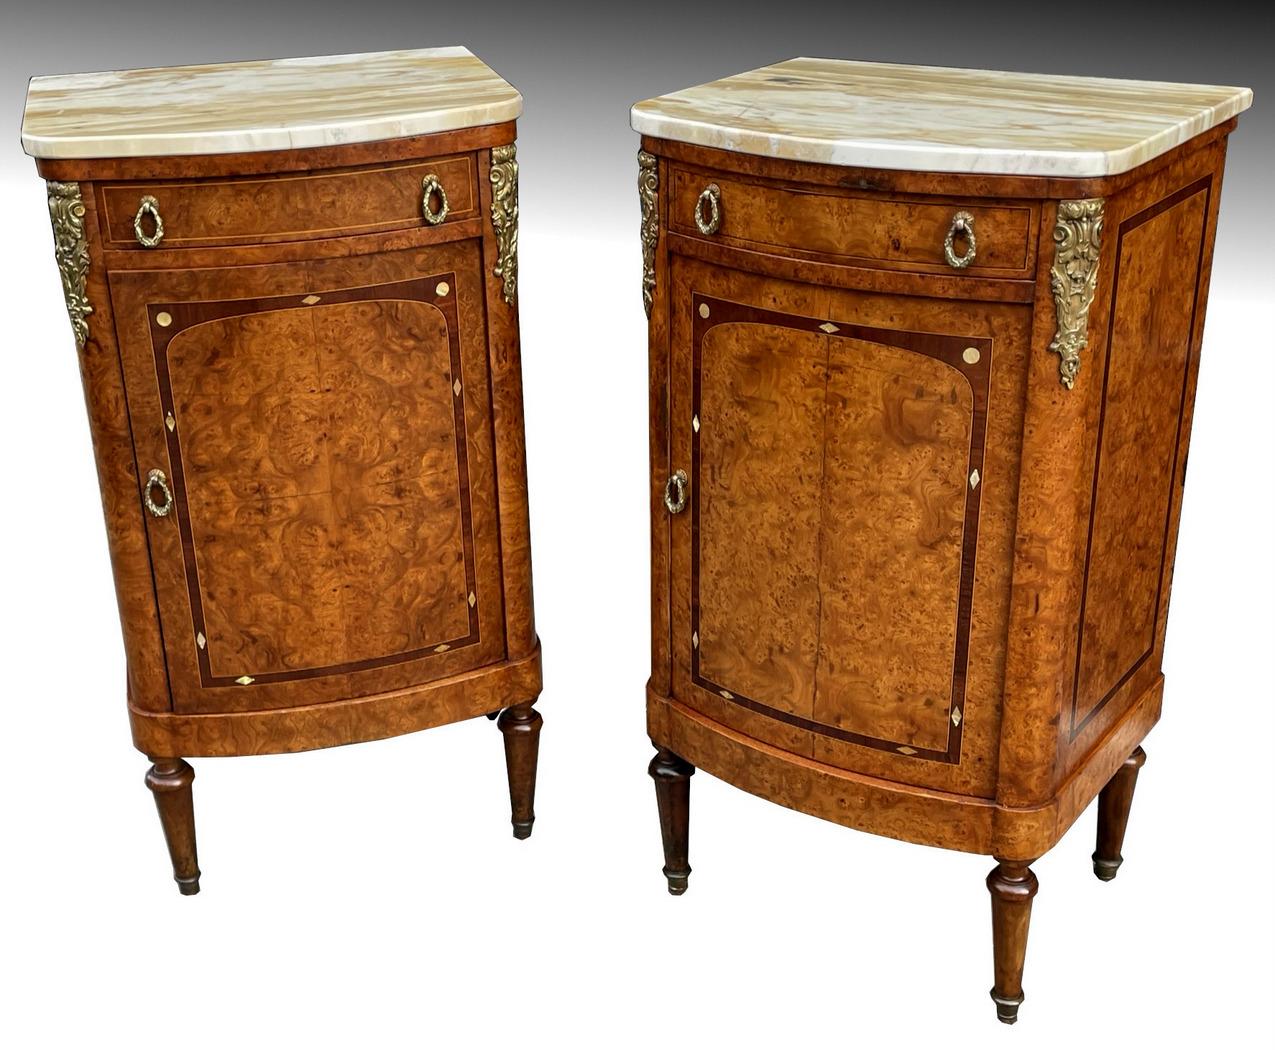 Victorian Antique French Ormolu Marble Top Santos Wood Bedside Cabinets Locker Nightstands For Sale